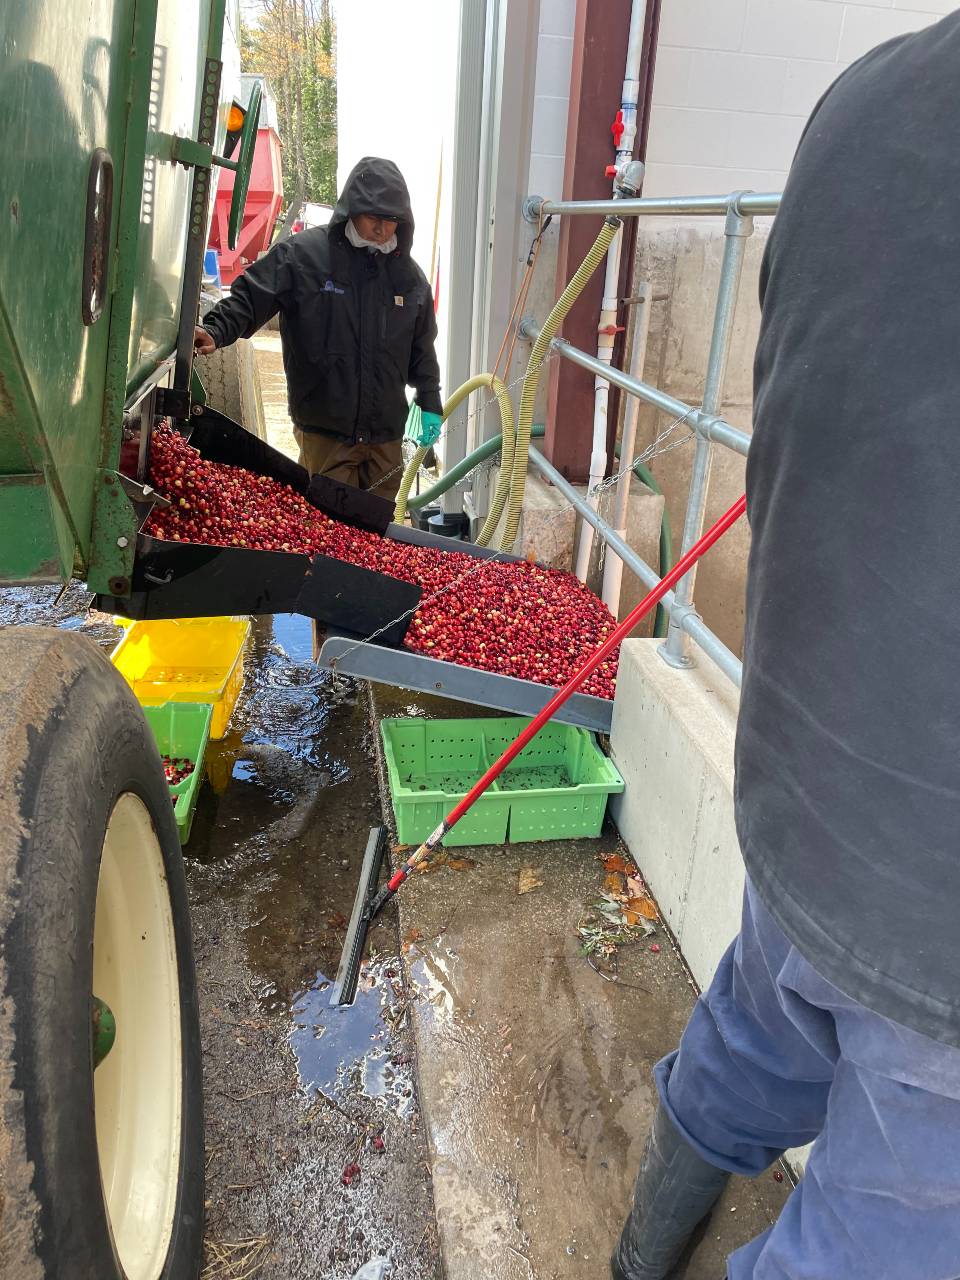 Loading Cranberries to Wash